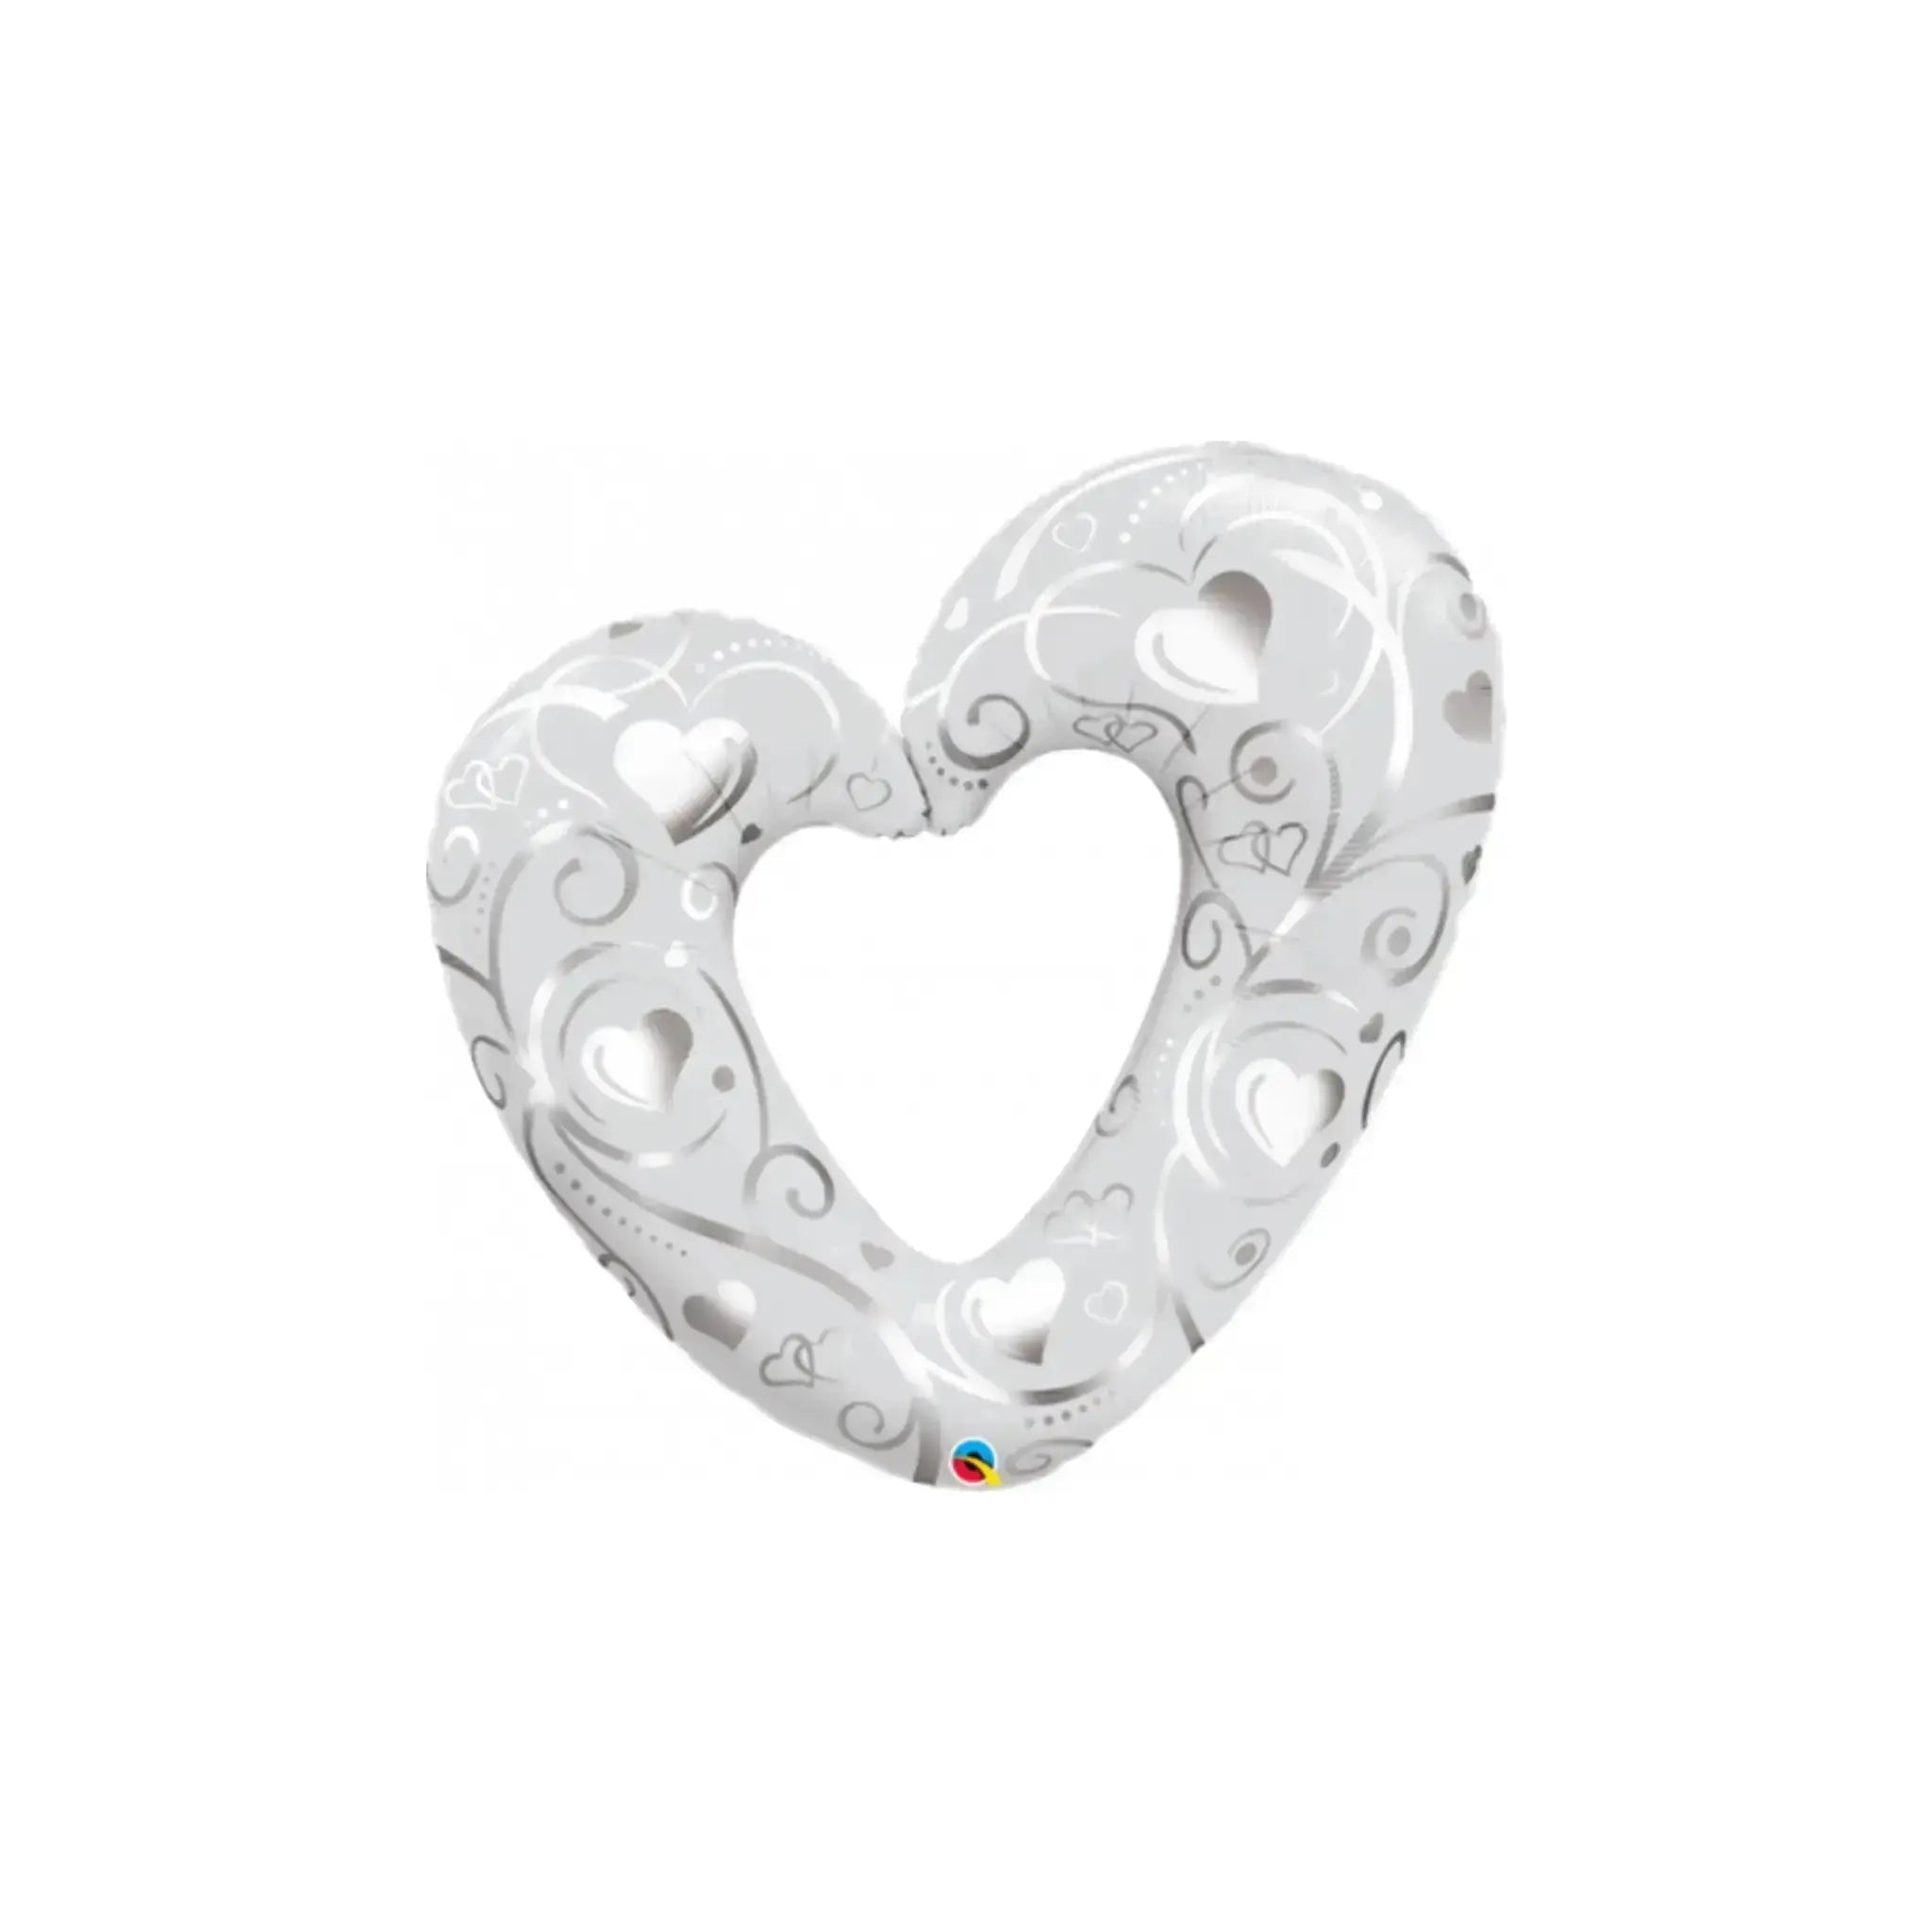 Swirling Silver Open Heart Balloon | The Party Hut